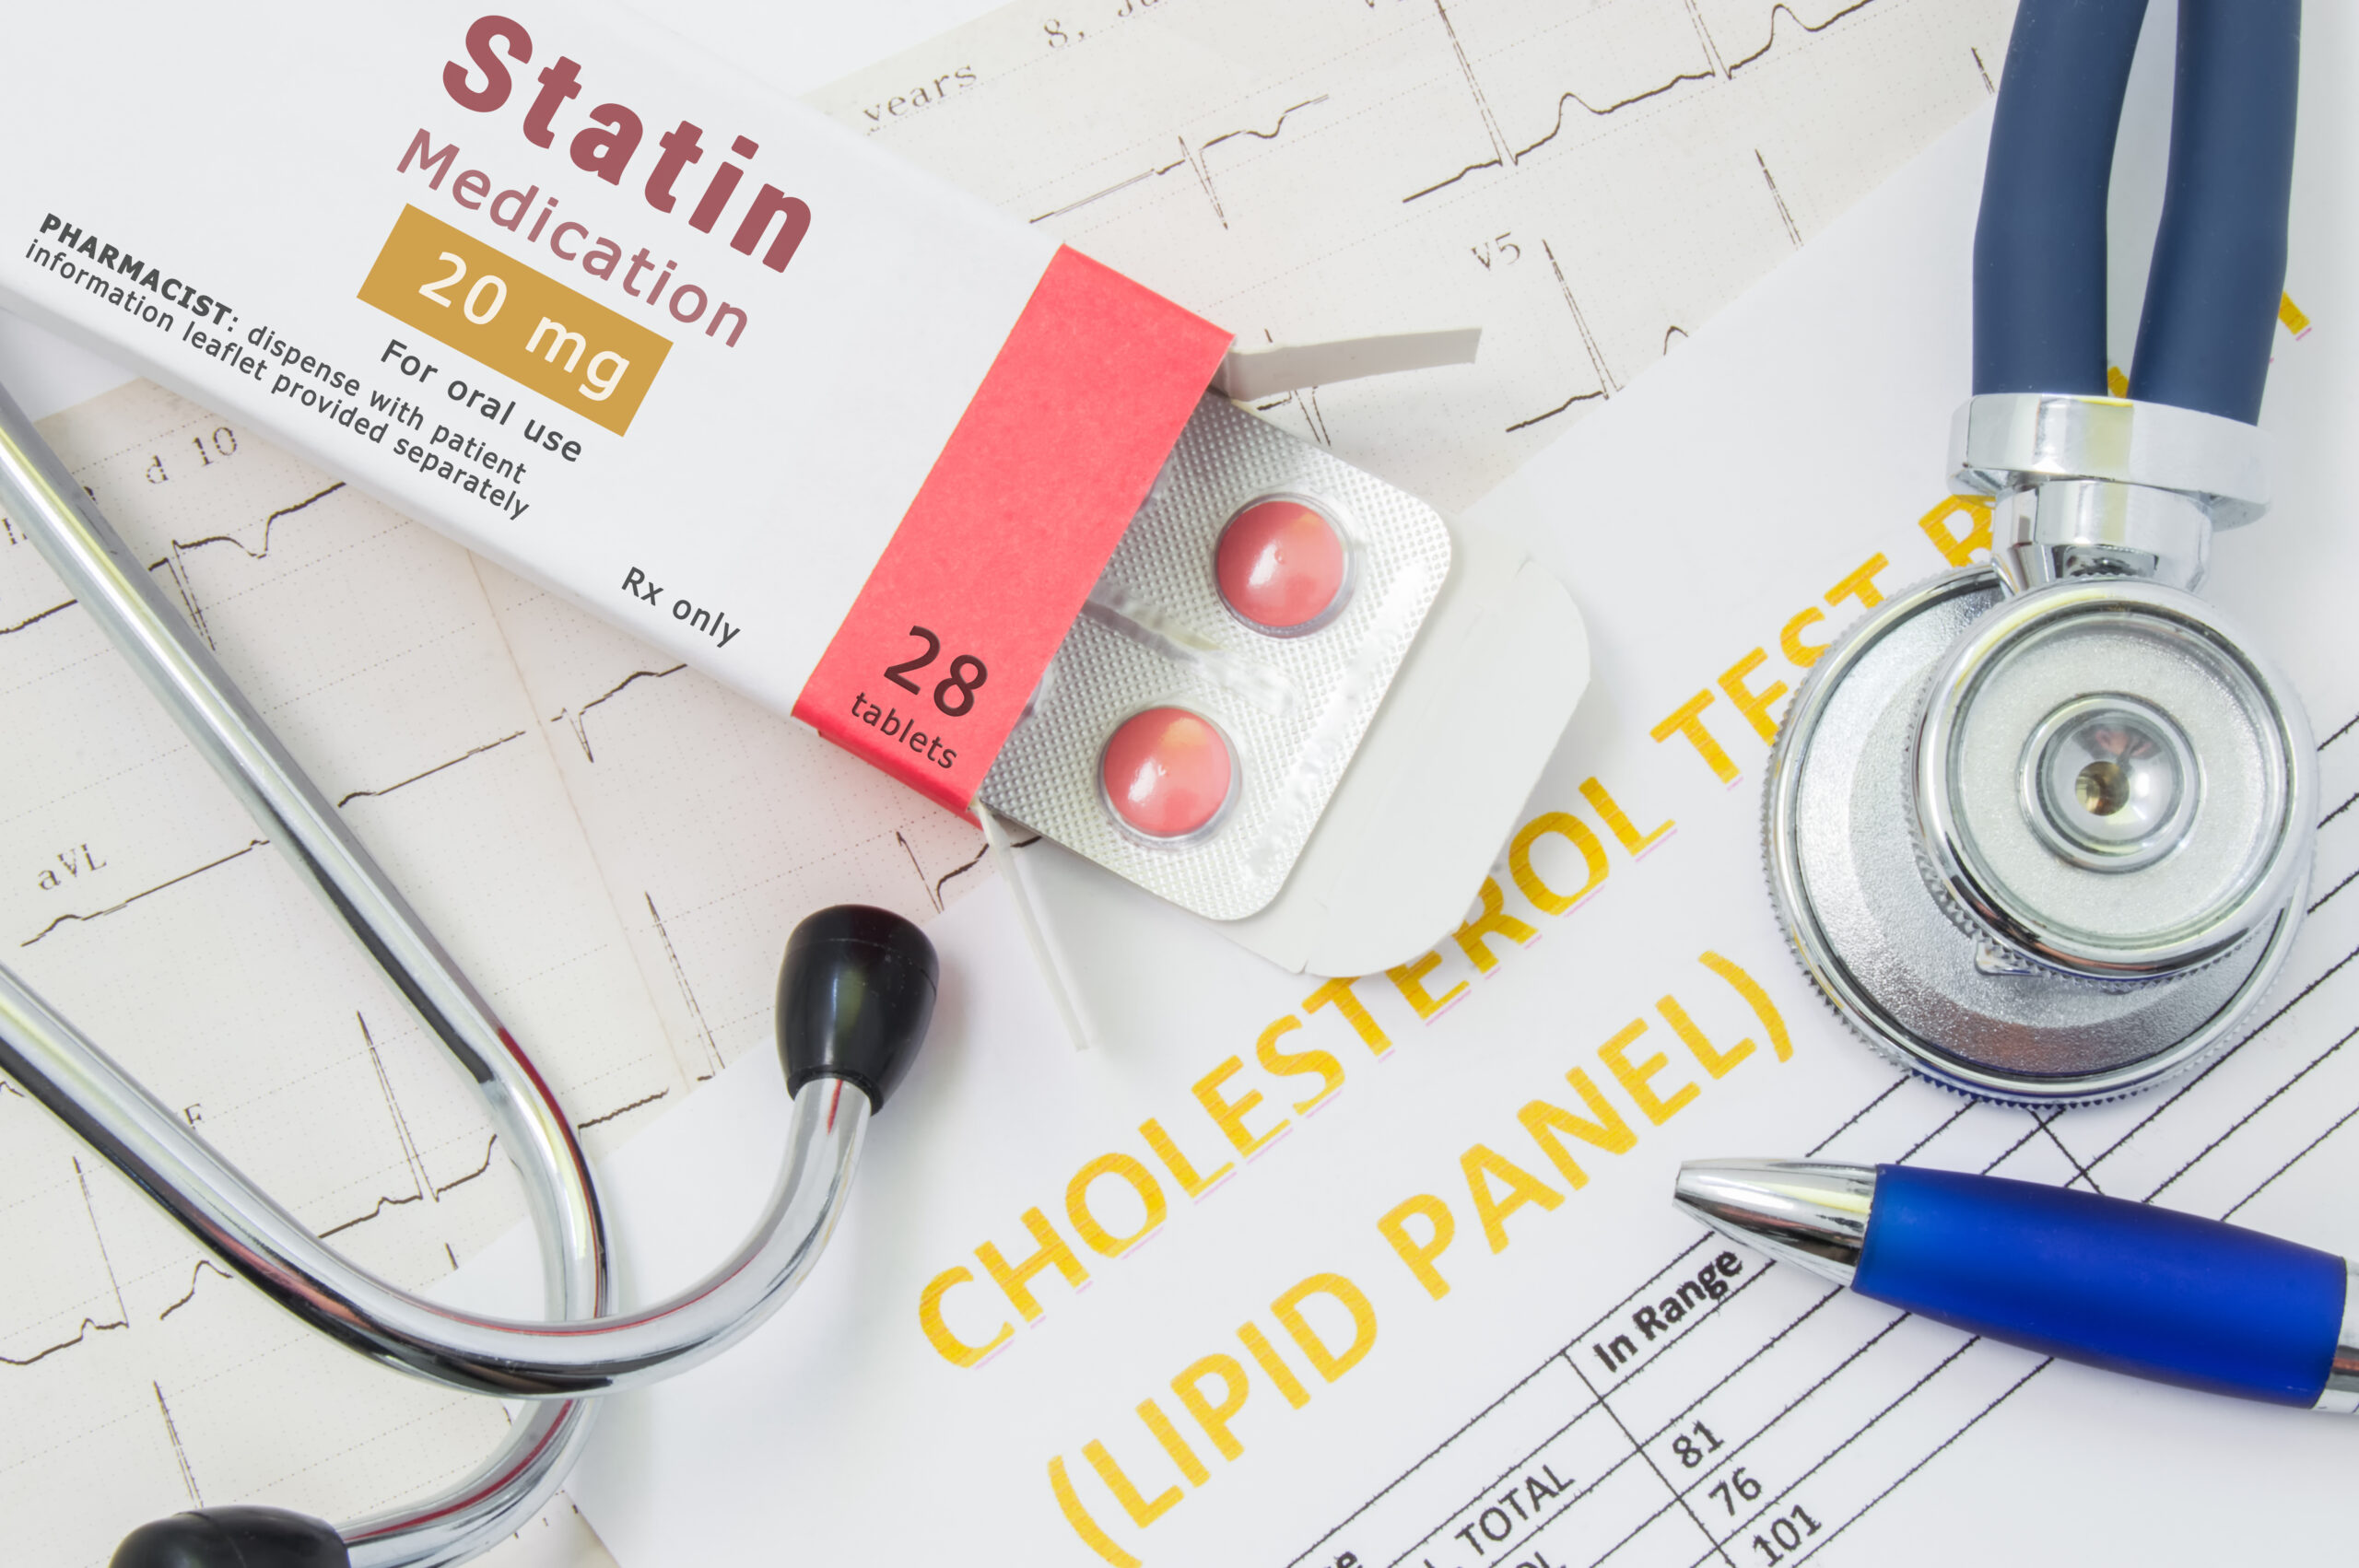 Statin drug box on top of EKG tracing with blue stethoscope